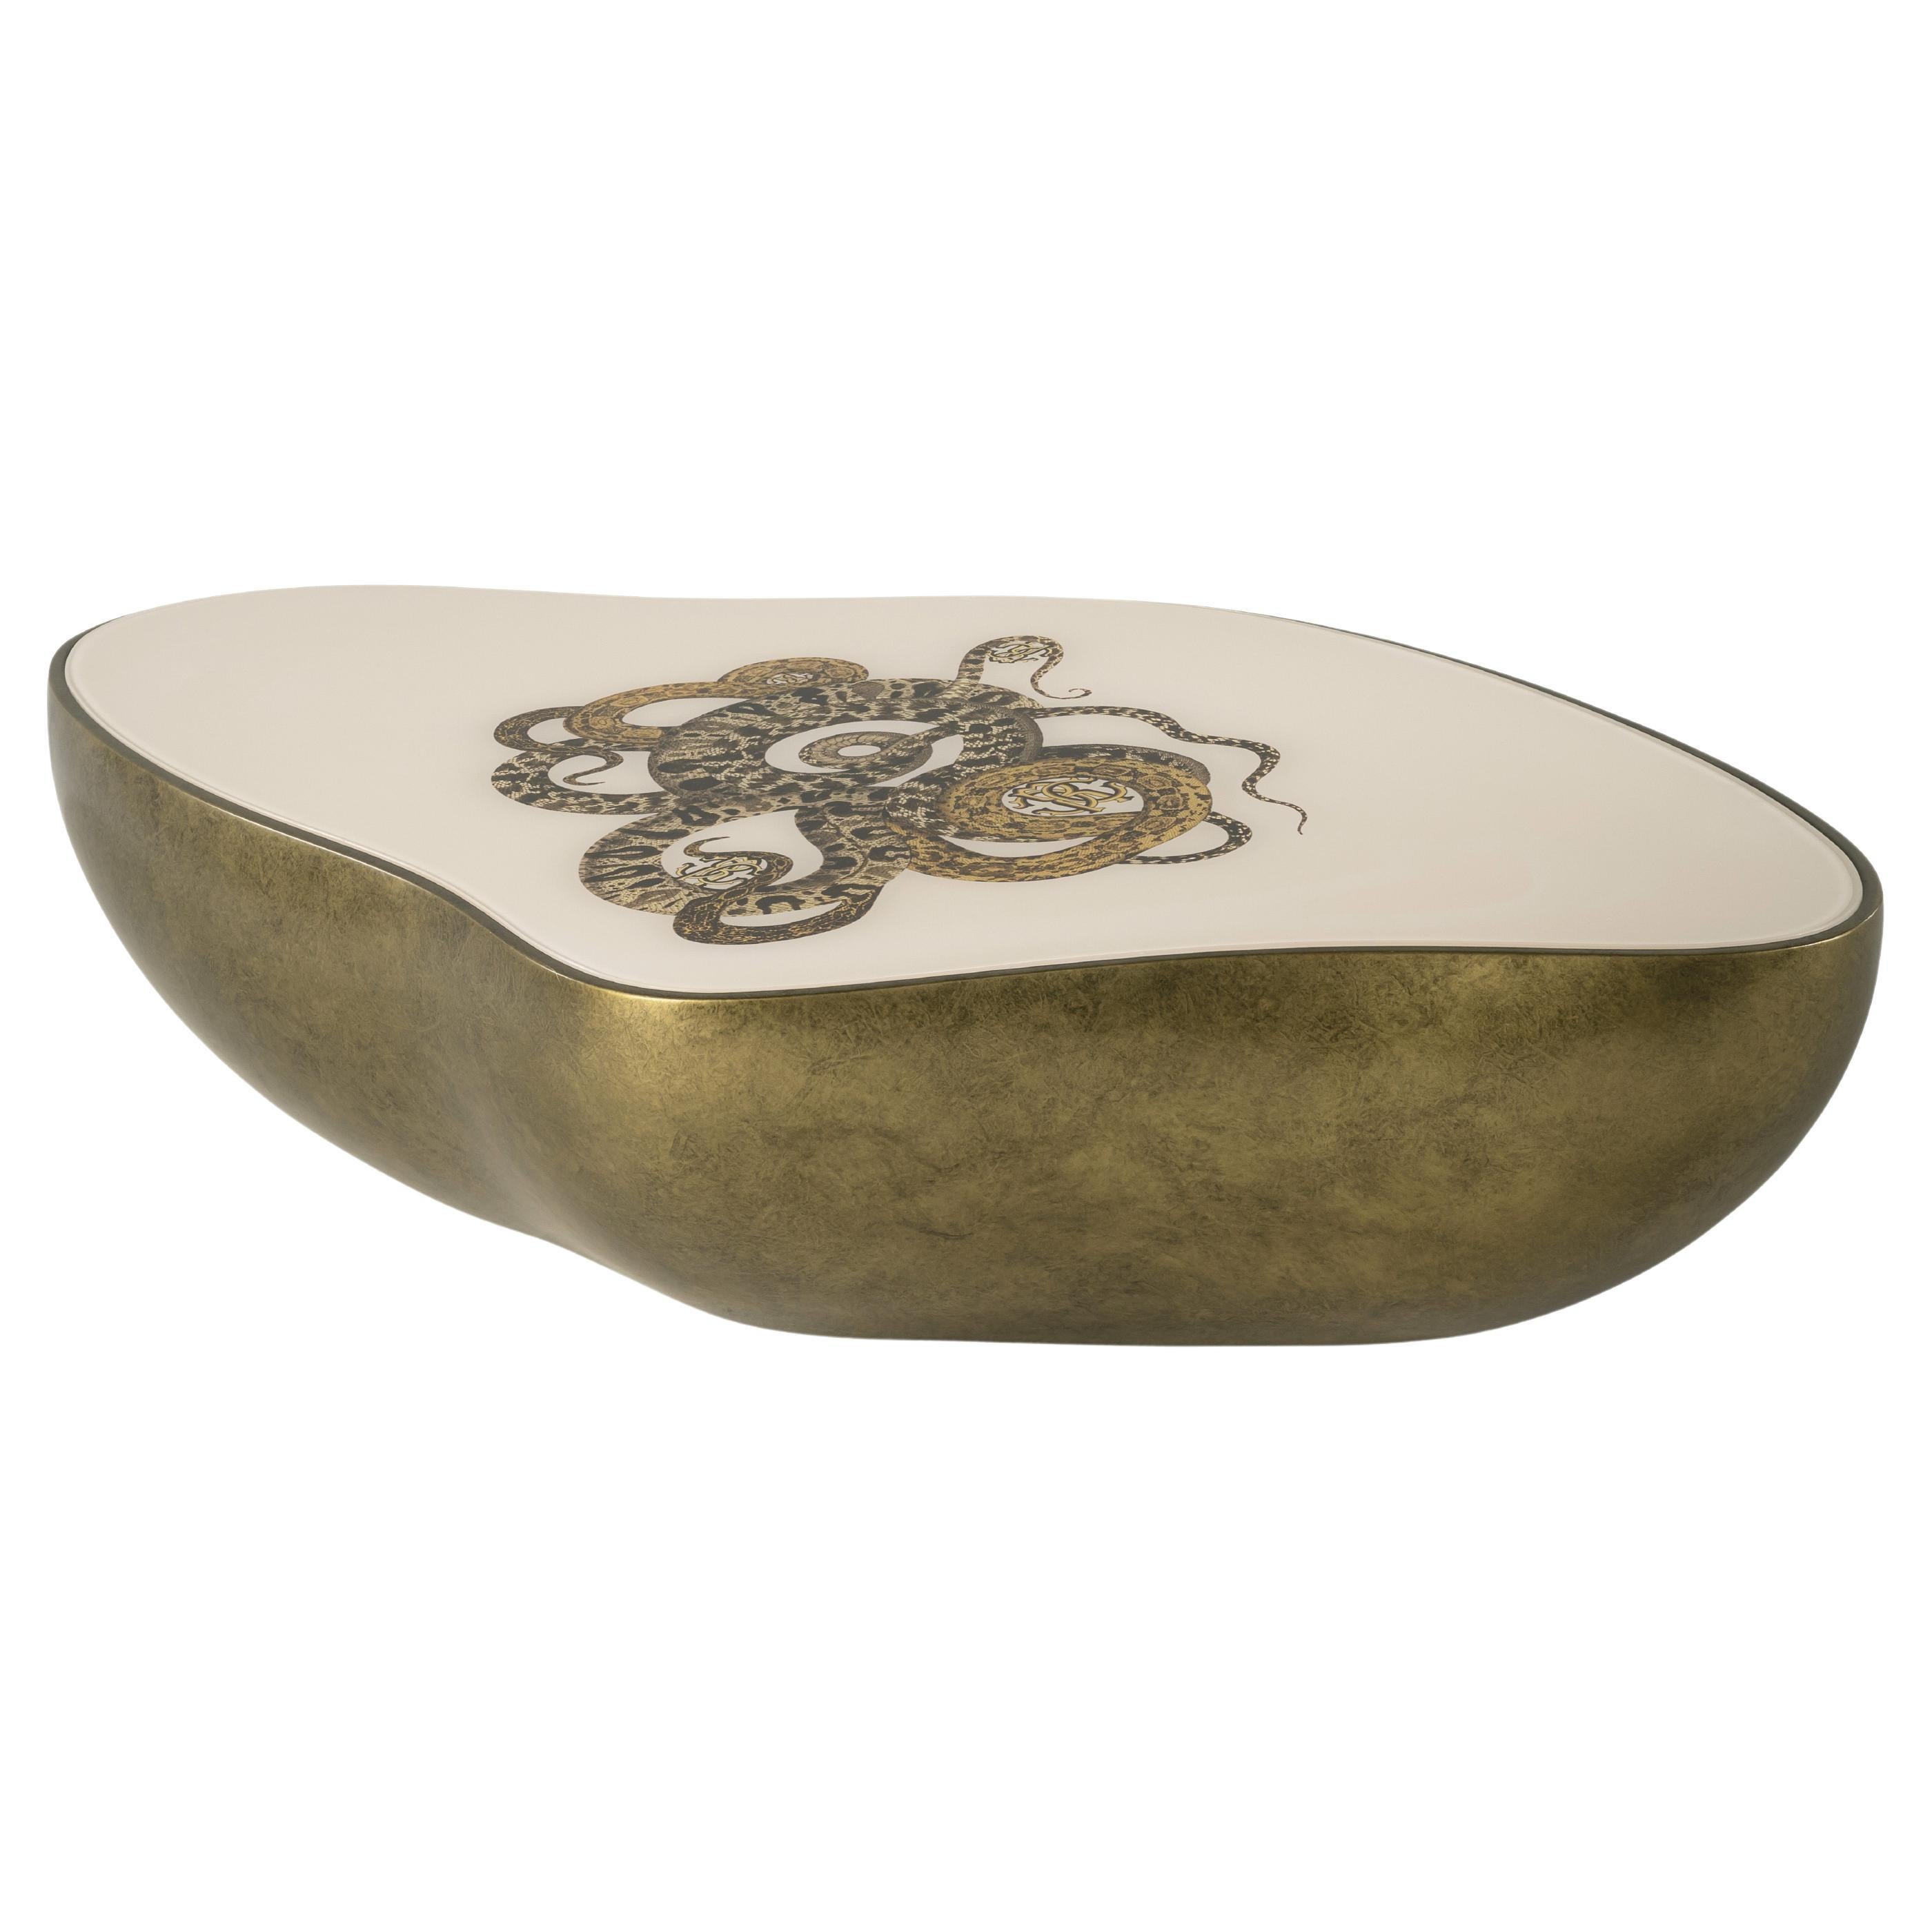 21st Century, Meru Central Table in Resin by Roberto Cavalli Home Interiors